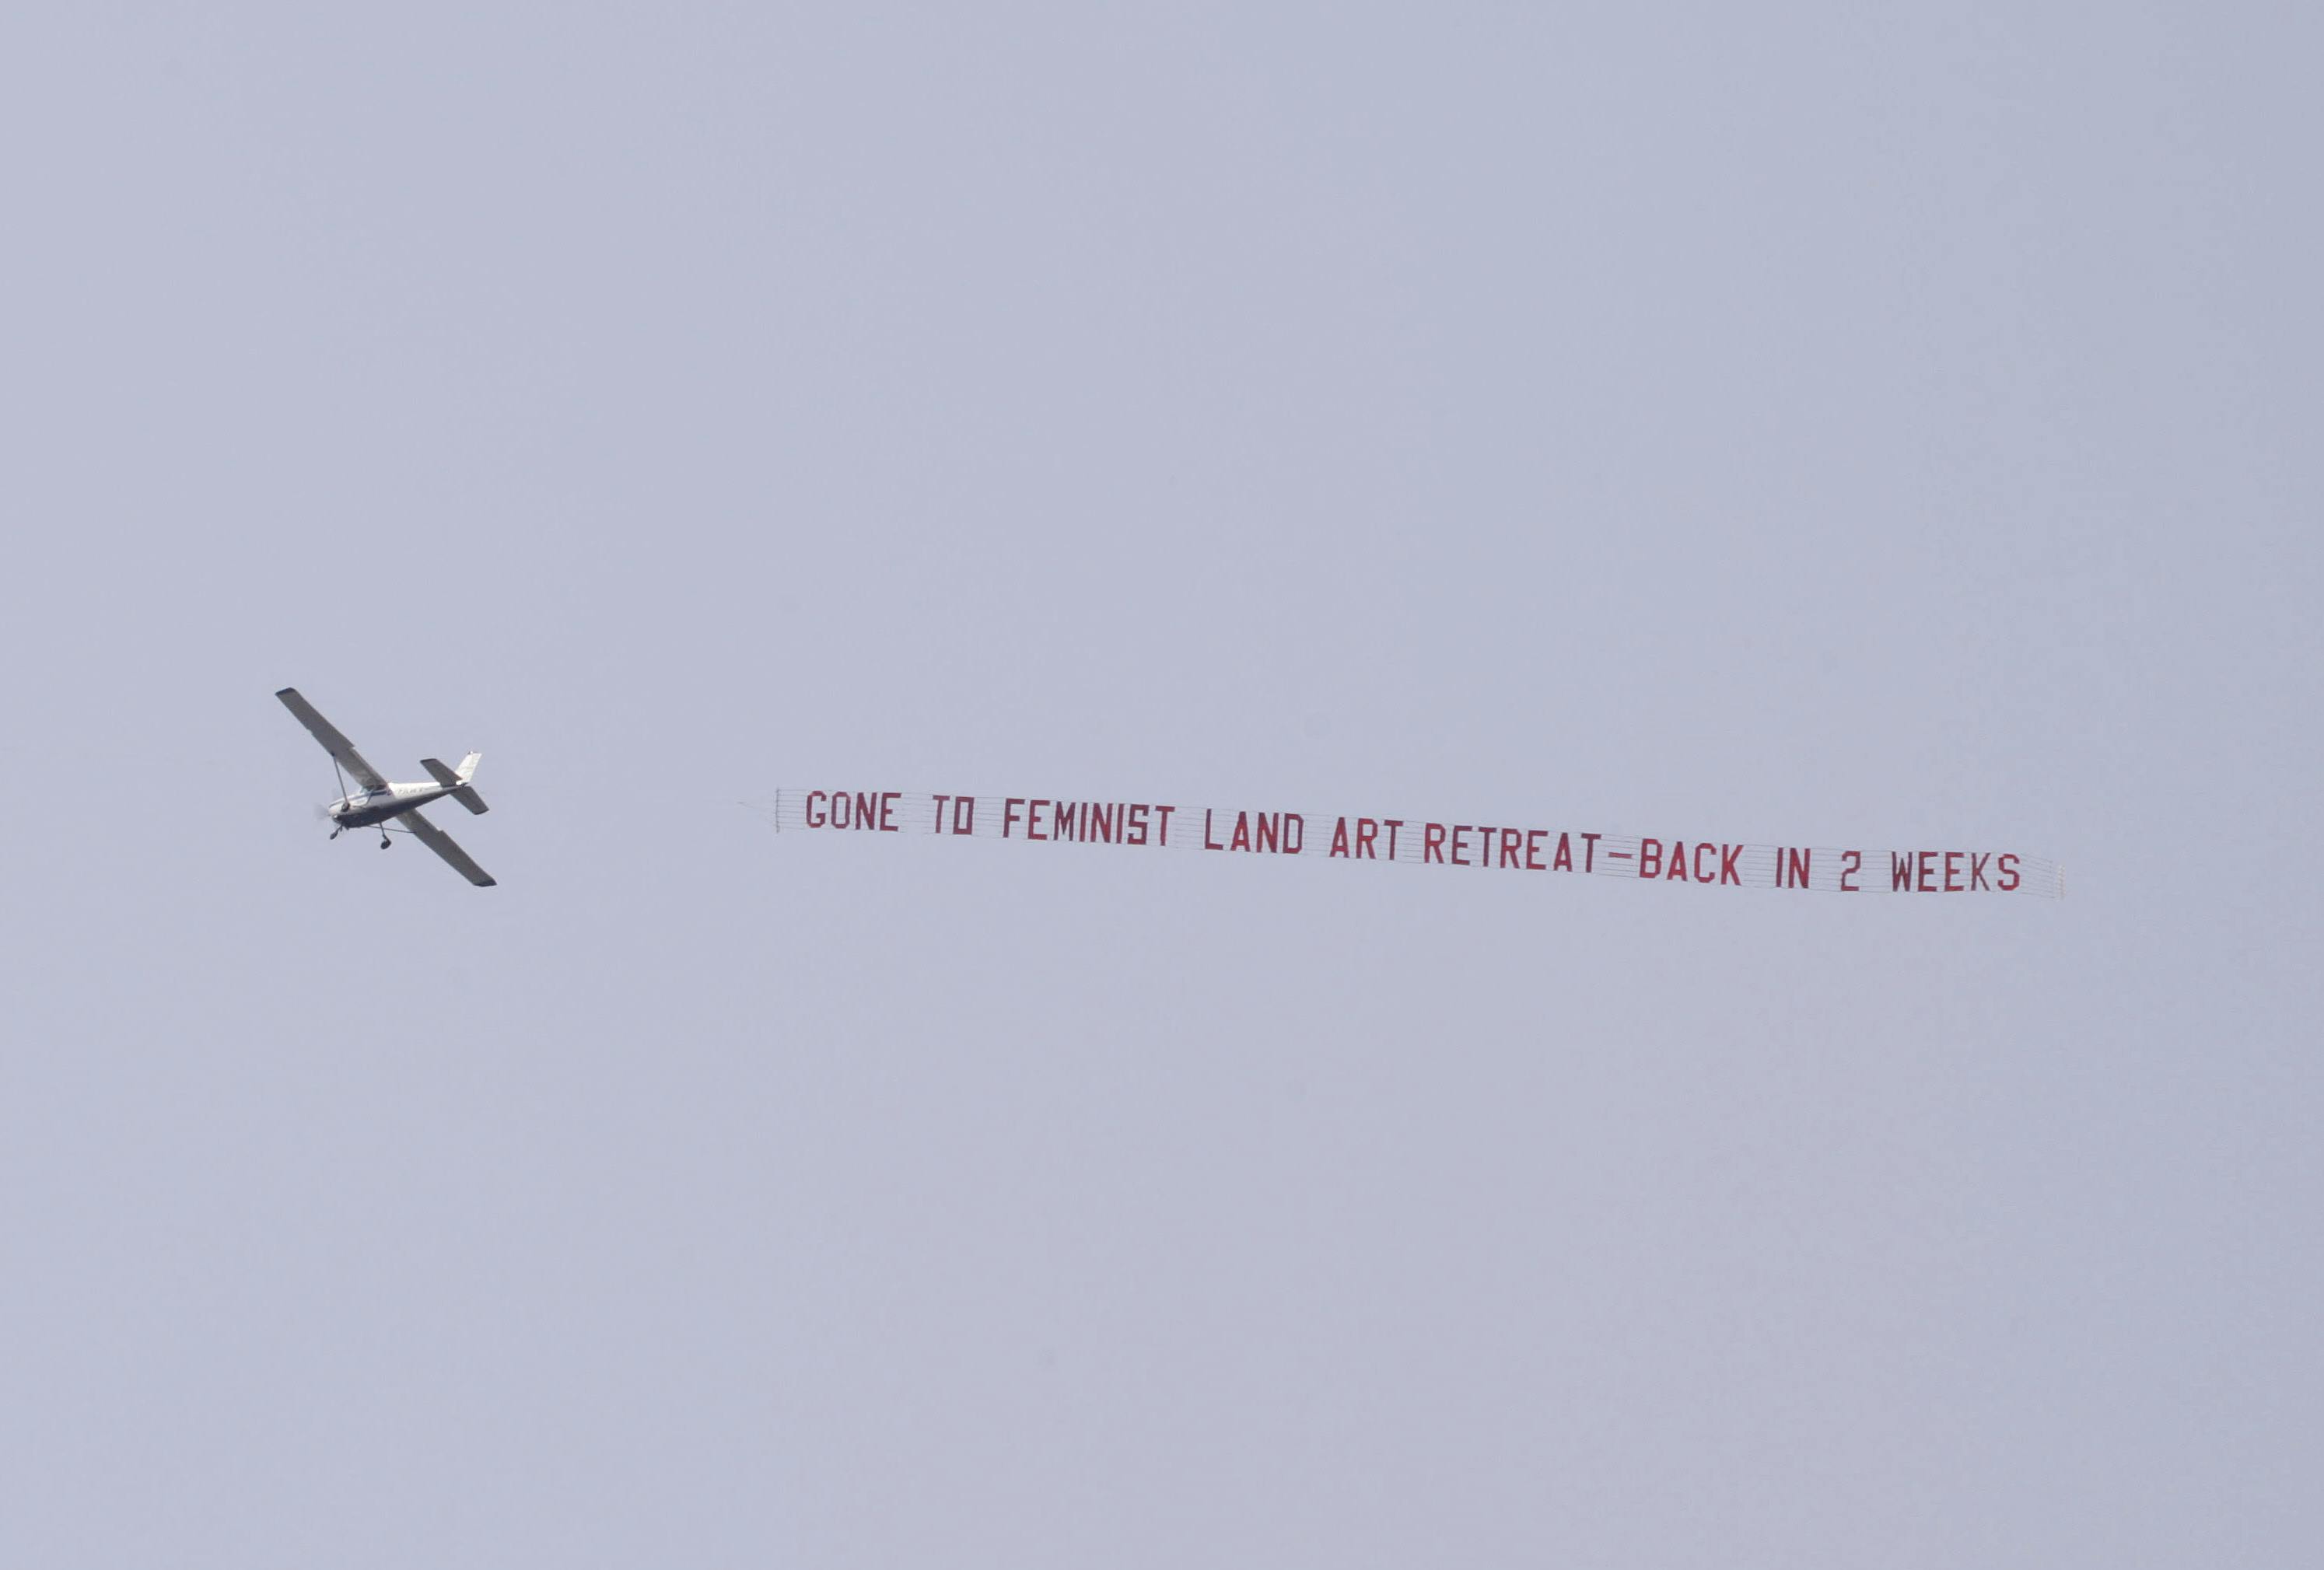 A small plane flying in the sky pulls a banner that reads in red text: “GONE TO FEMINIST LAND ART RETREAT- BACK IN 2 WEEKS”.